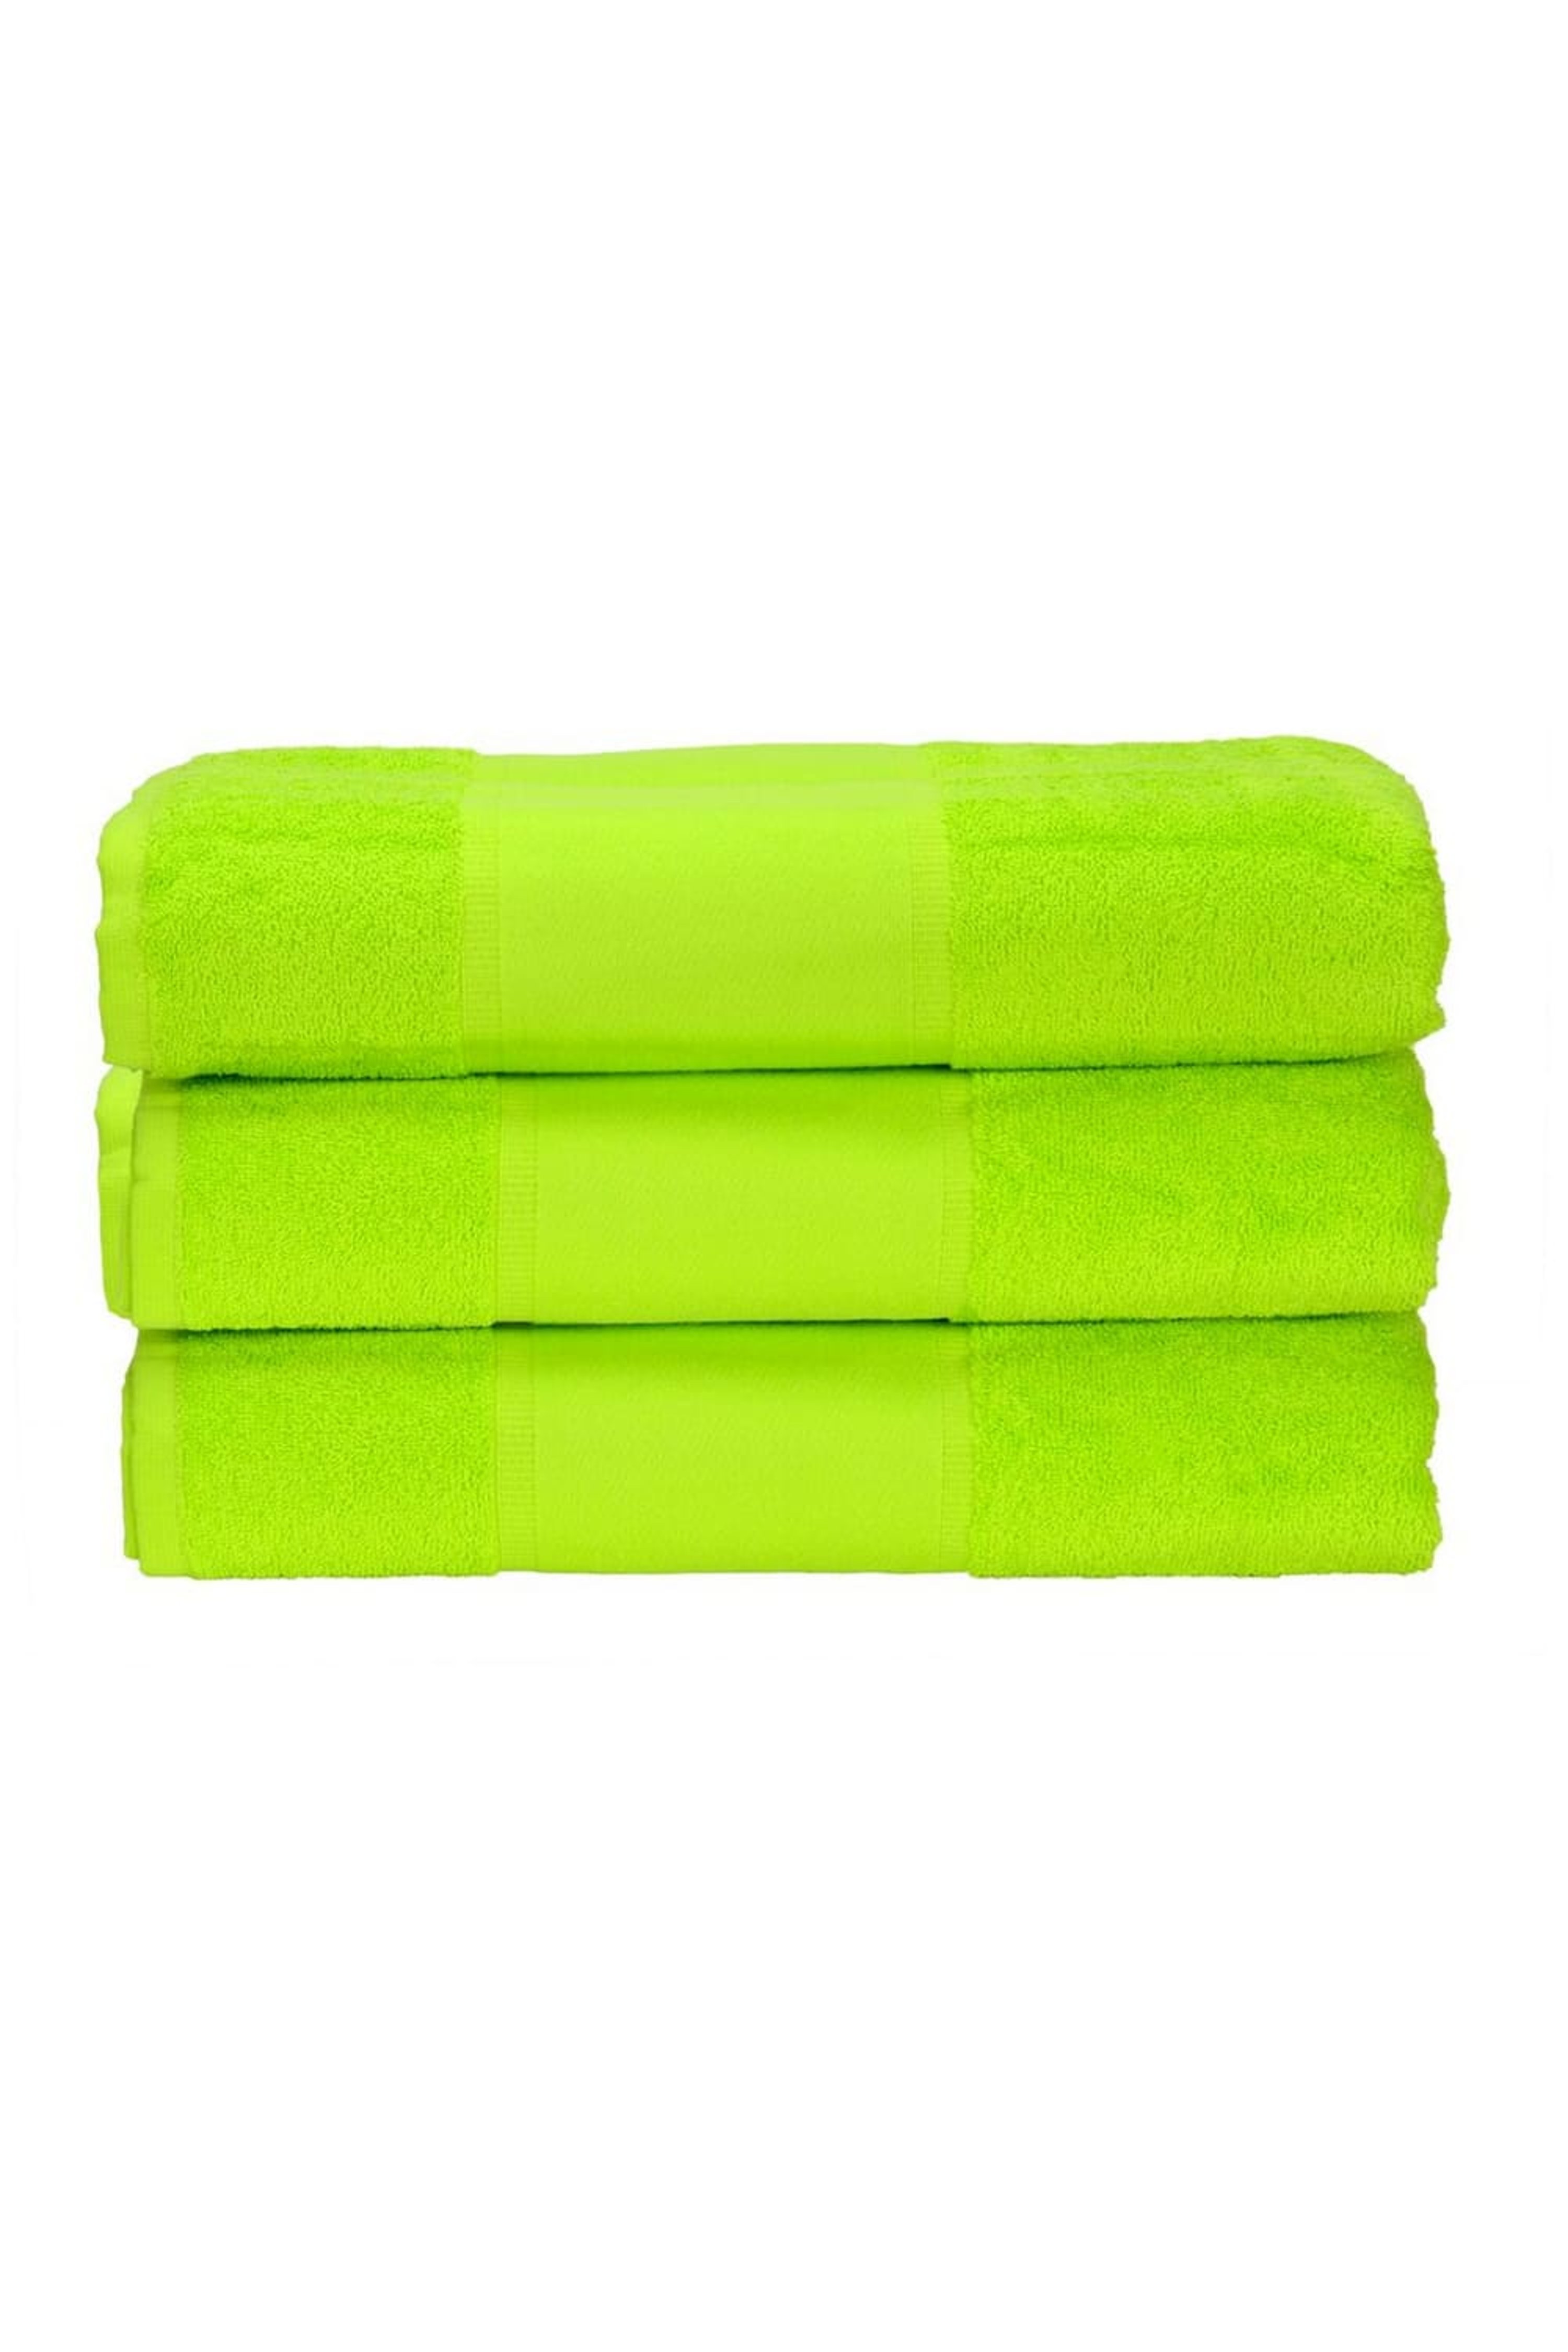 A&R TOWELS A&R TOWELS A&R TOWELS PRINT-ME HAND TOWEL (LIME GREEN) (ONE SIZE)